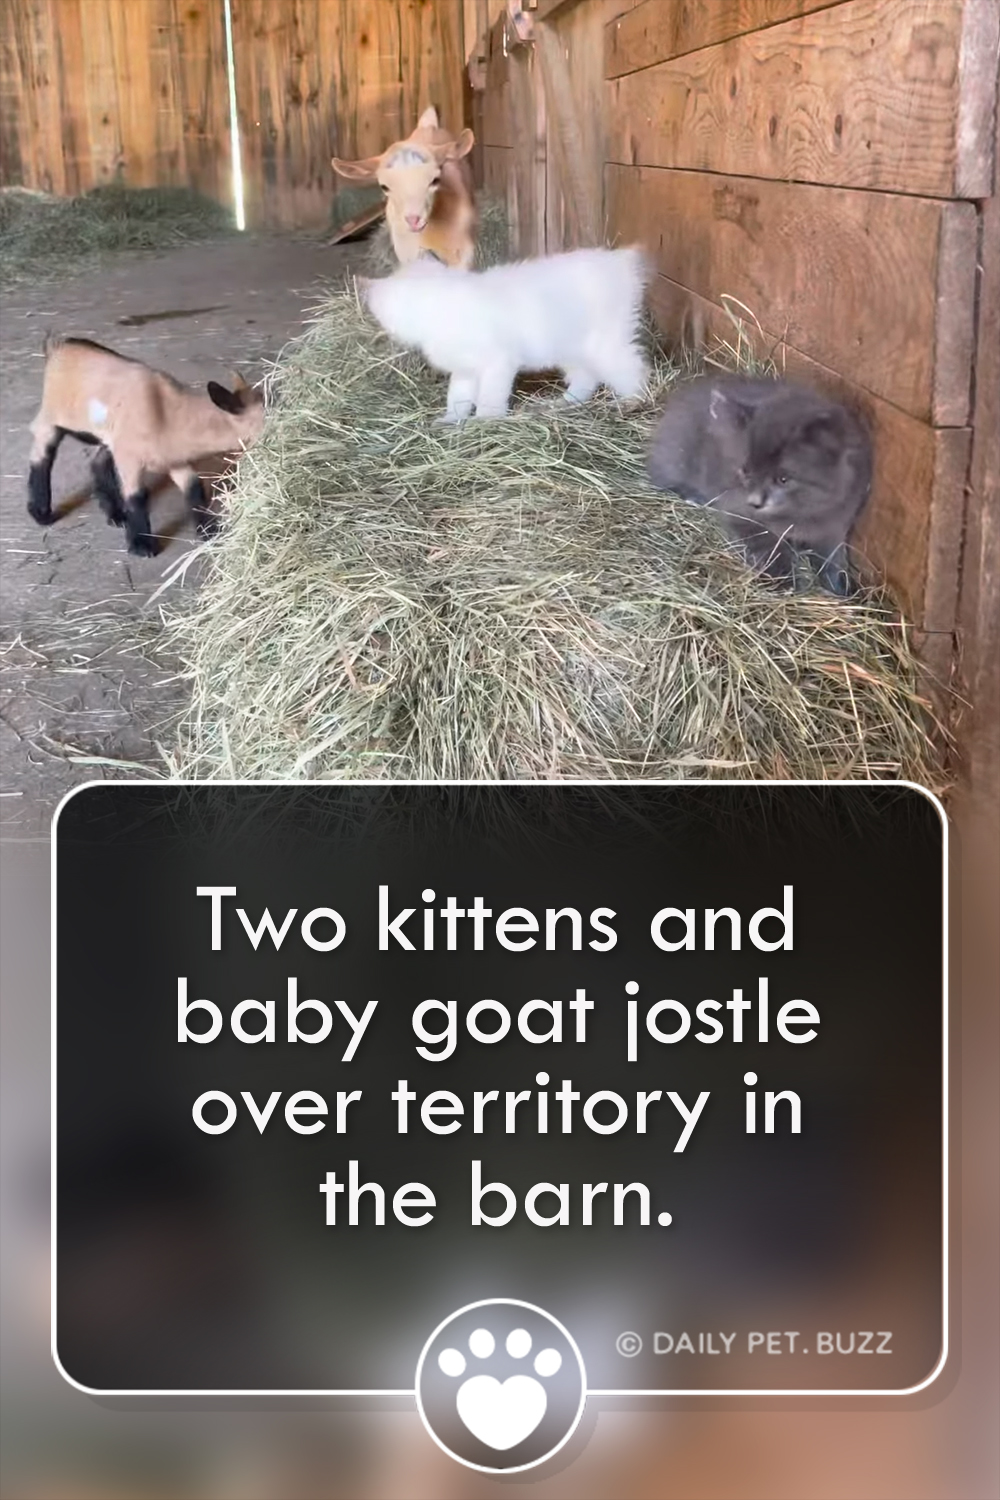 Two kittens and baby goat jostle over territory in the barn.